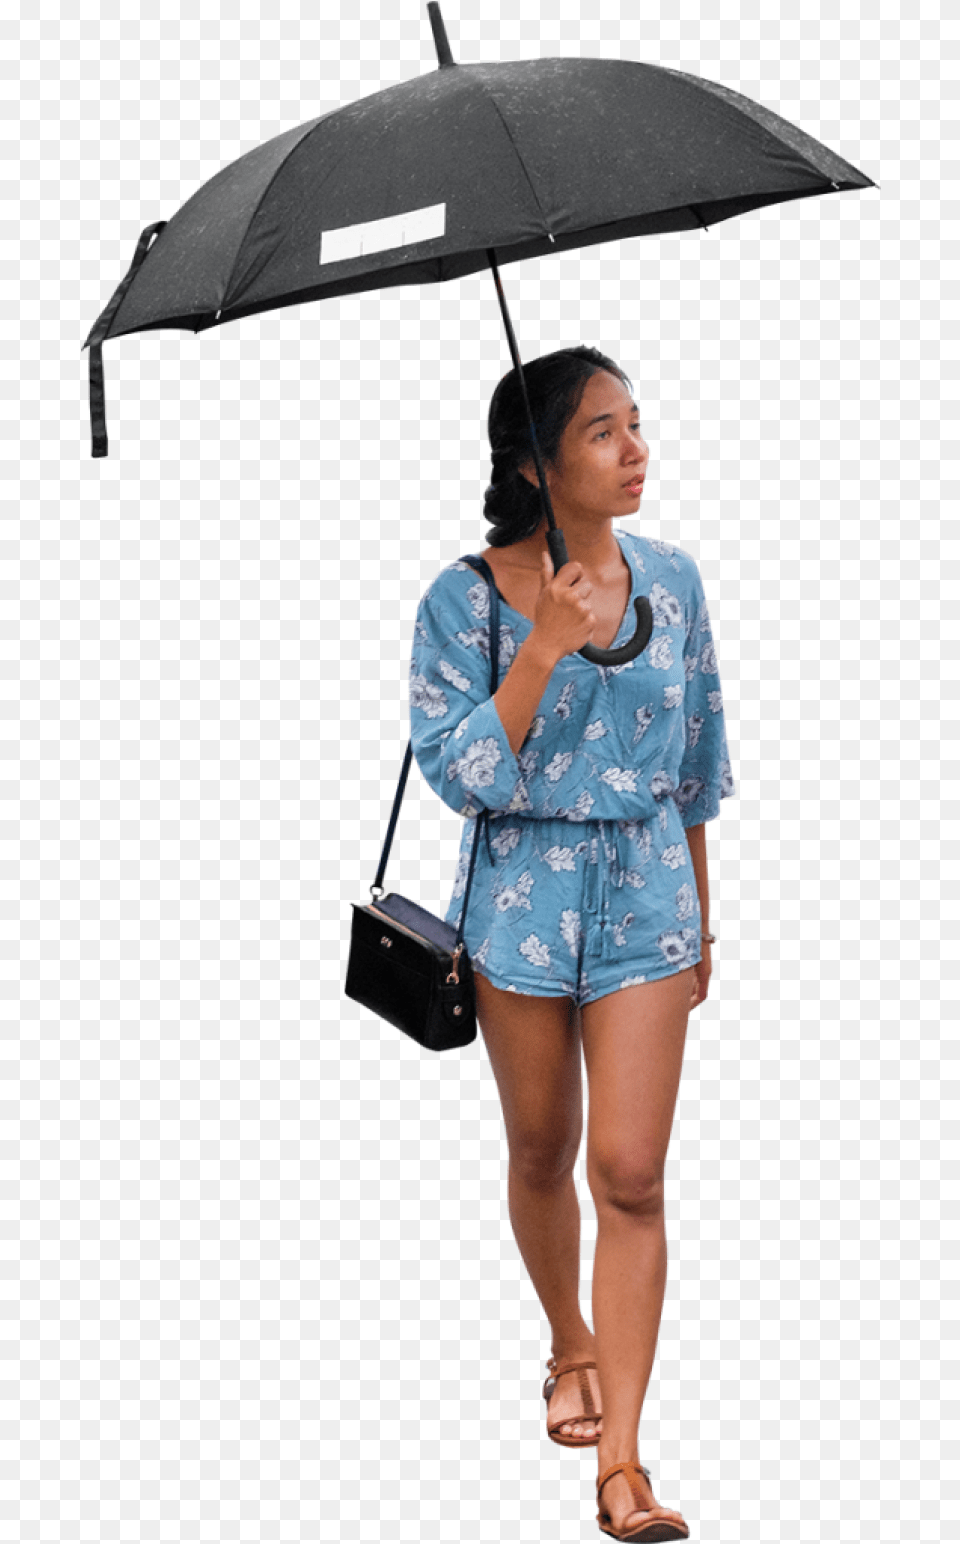 Walking In The Rain People With An Umbrella, Accessories, Purse, Bag, Handbag Png Image